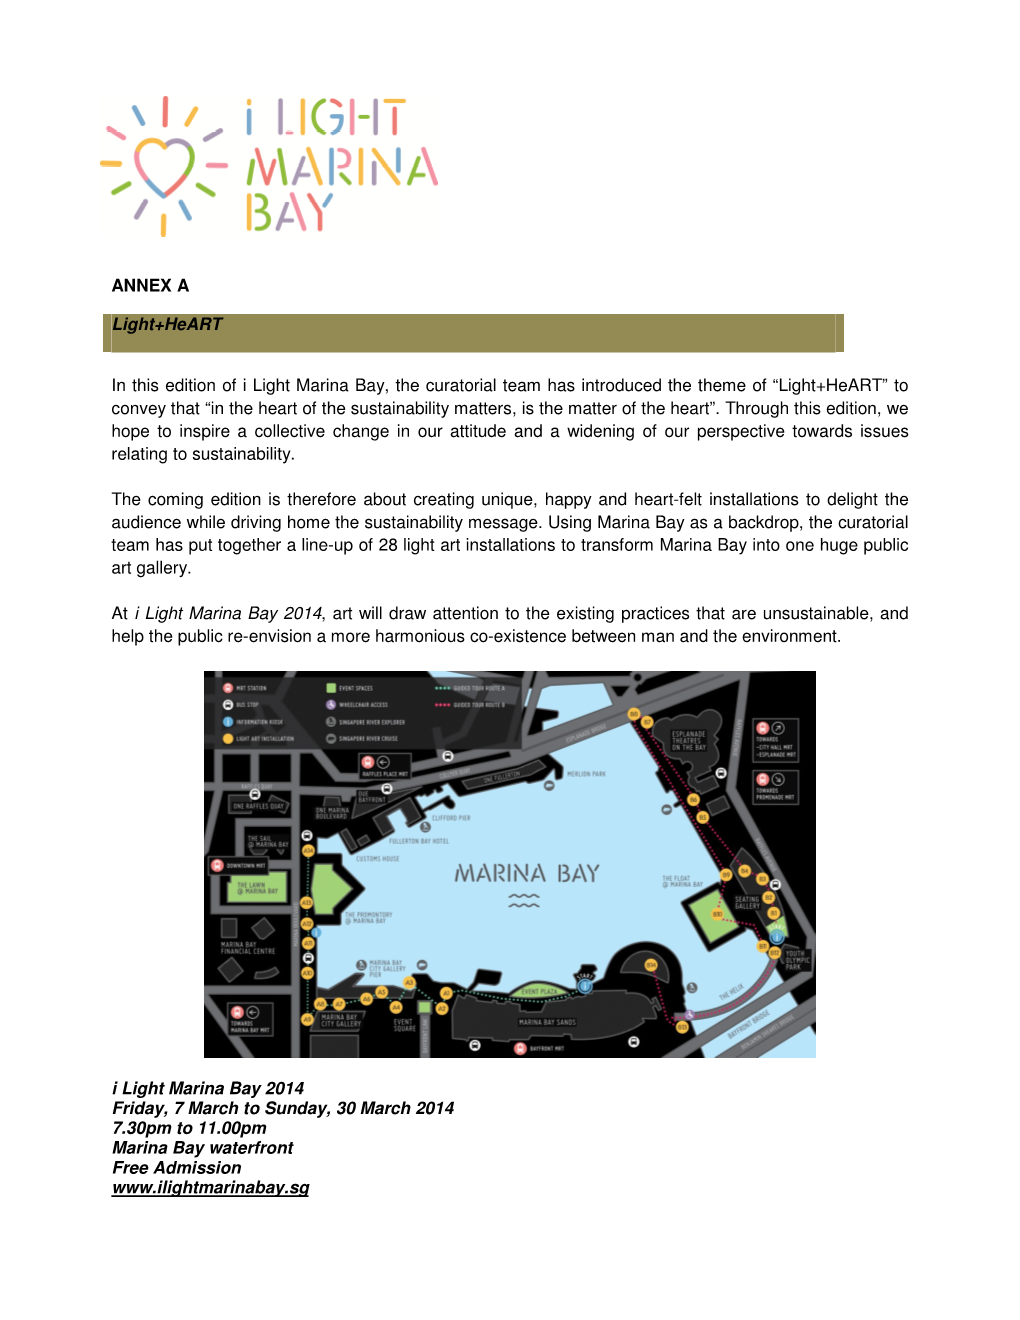 ANNEX a Light+Heart in This Edition of I Light Marina Bay, The